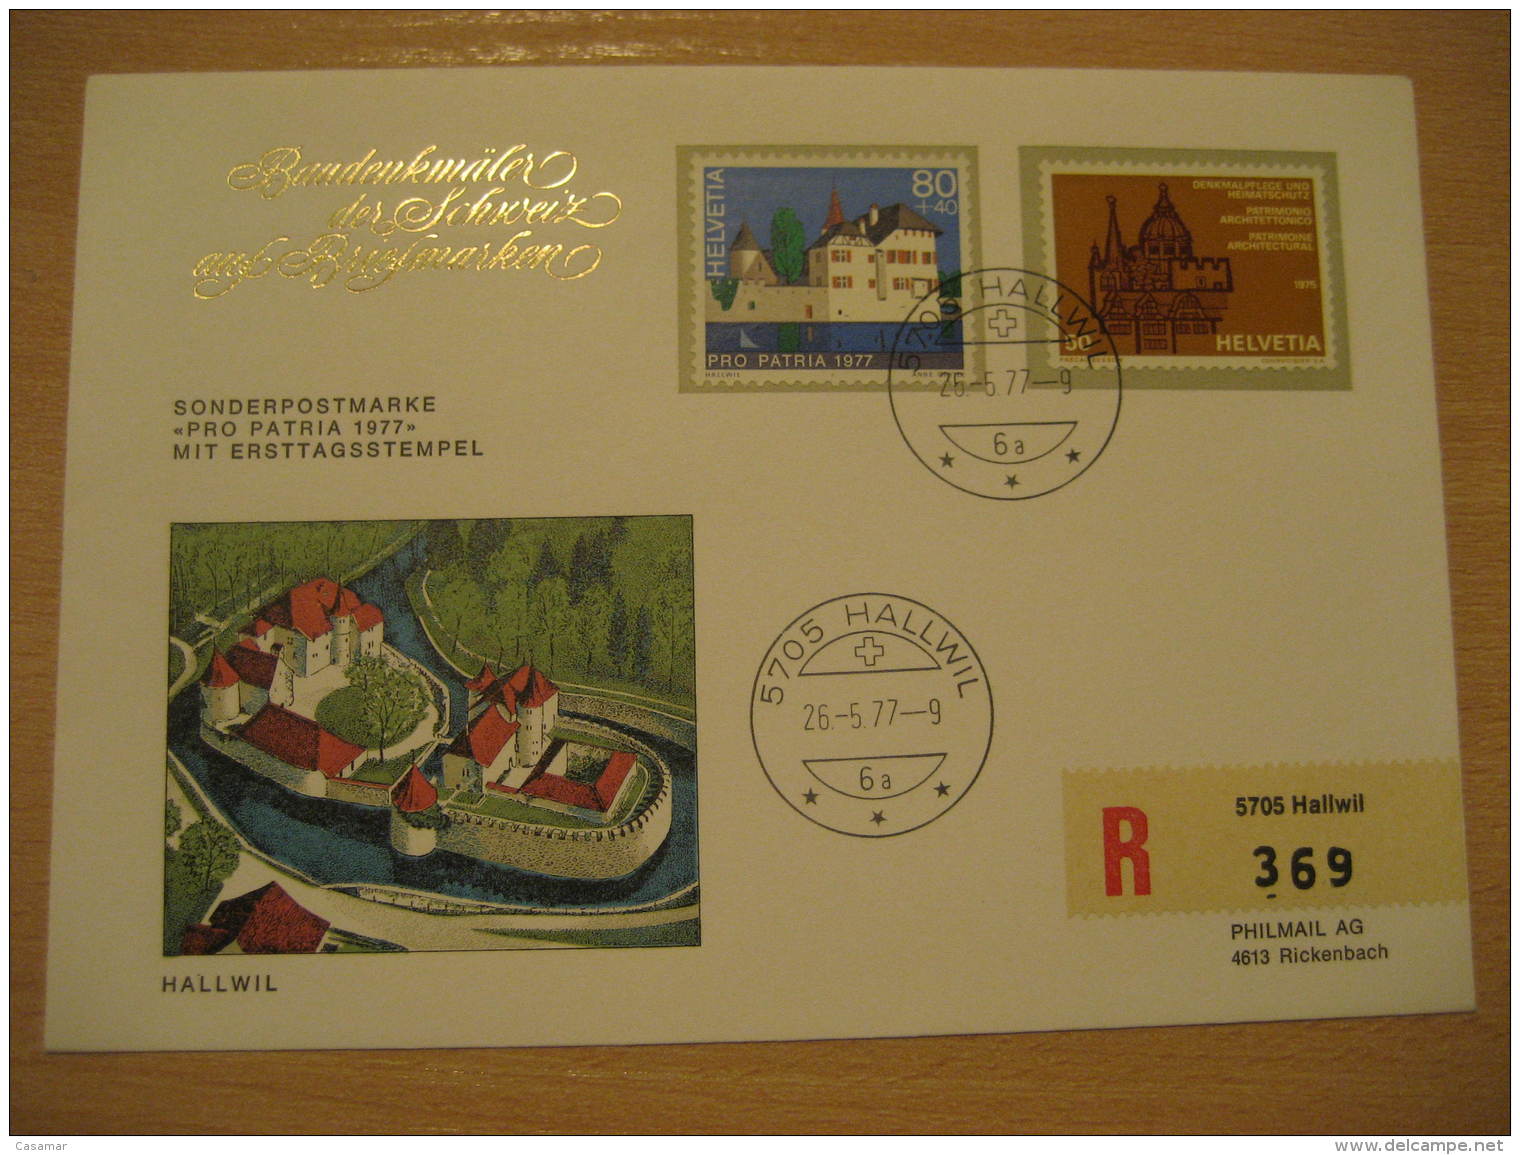 HALLWIL Castle Chateau Pro Patria 1977 Cancel Registered Cover SWITZERLAND - Covers & Documents